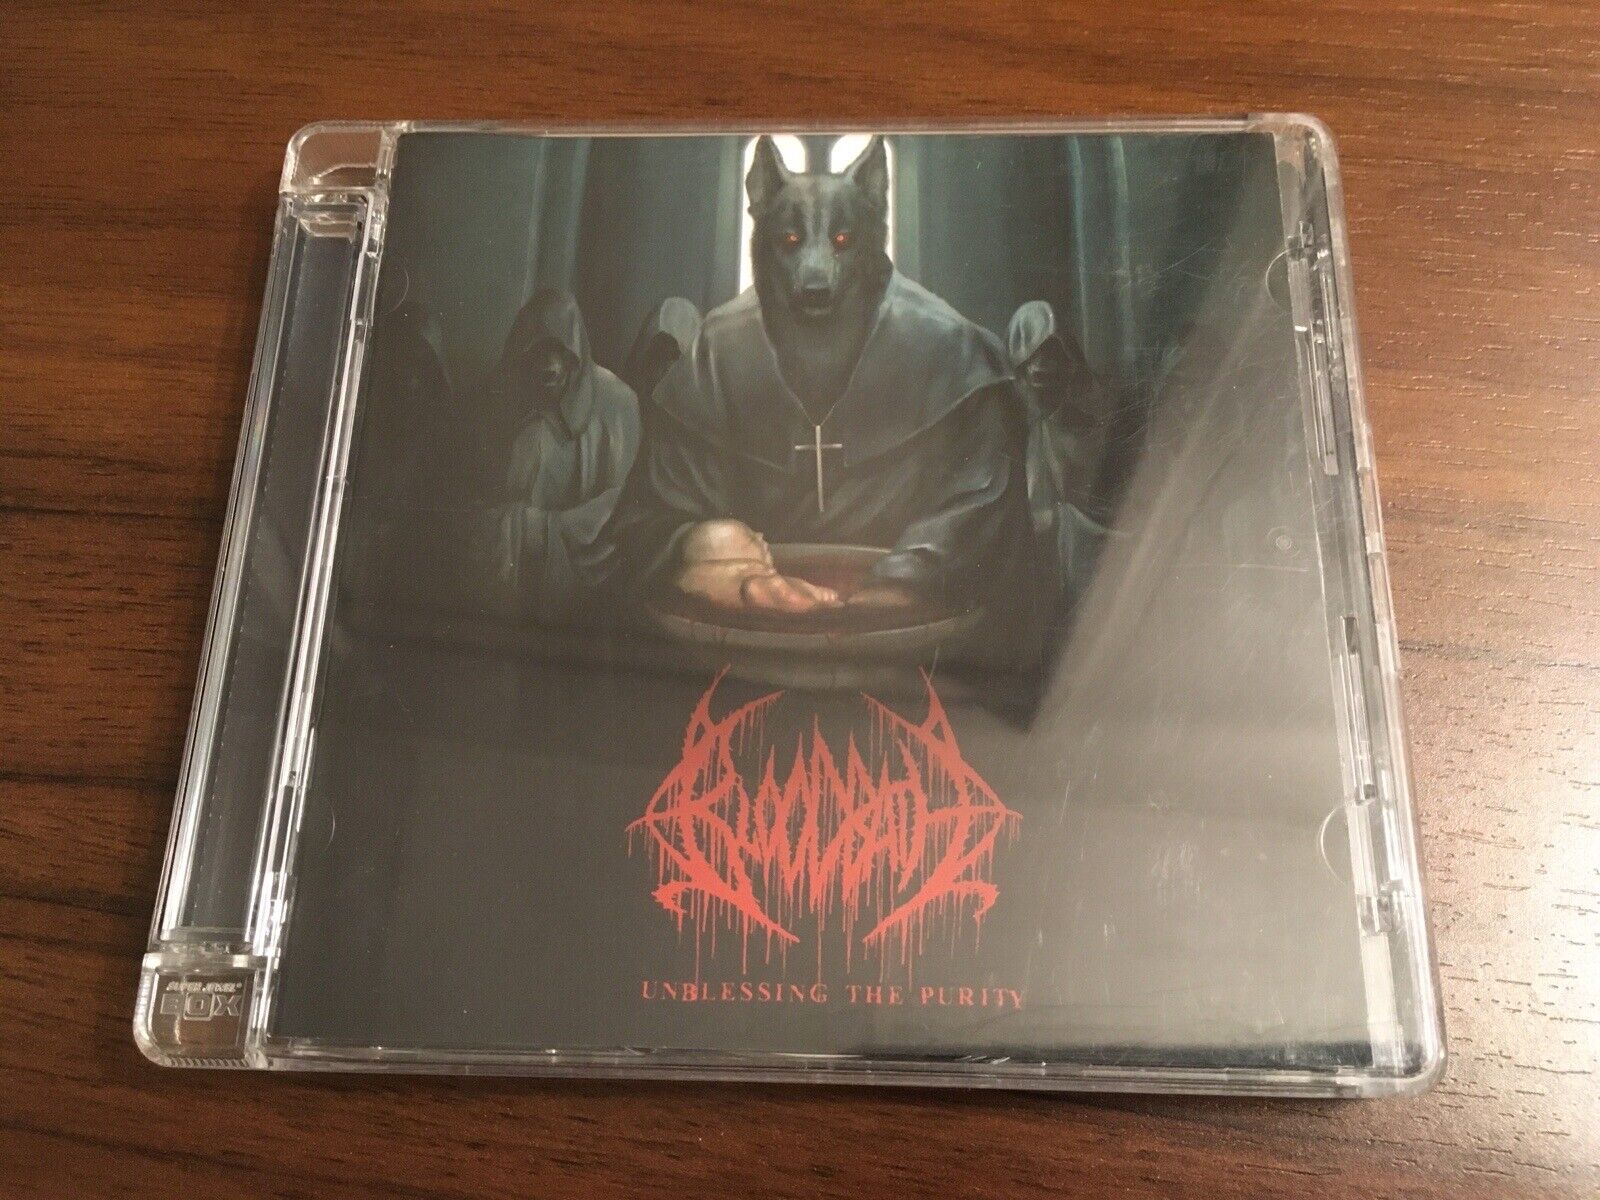 Bloodbath - Unblessing The Purity CD (2008 Peaceville [Limited Edition EP])